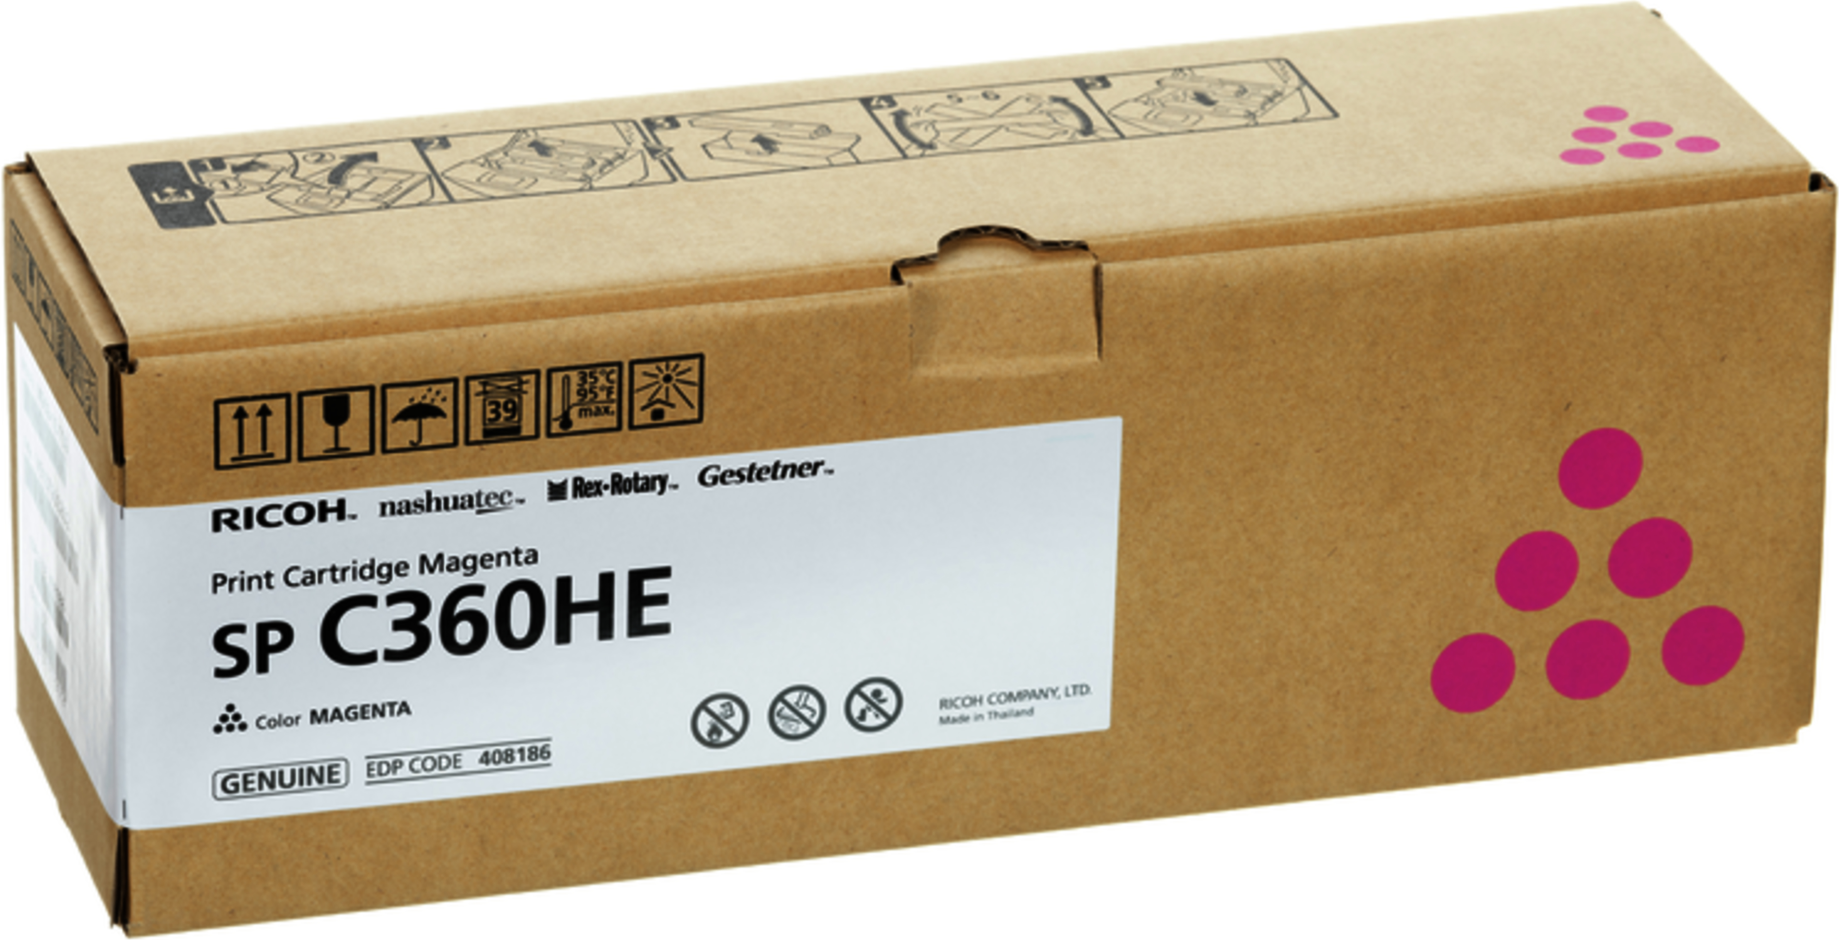 RICOH Toner Catrige Magenta for SP C360DNw standard capacity 5k pages ISO/IEC 19798